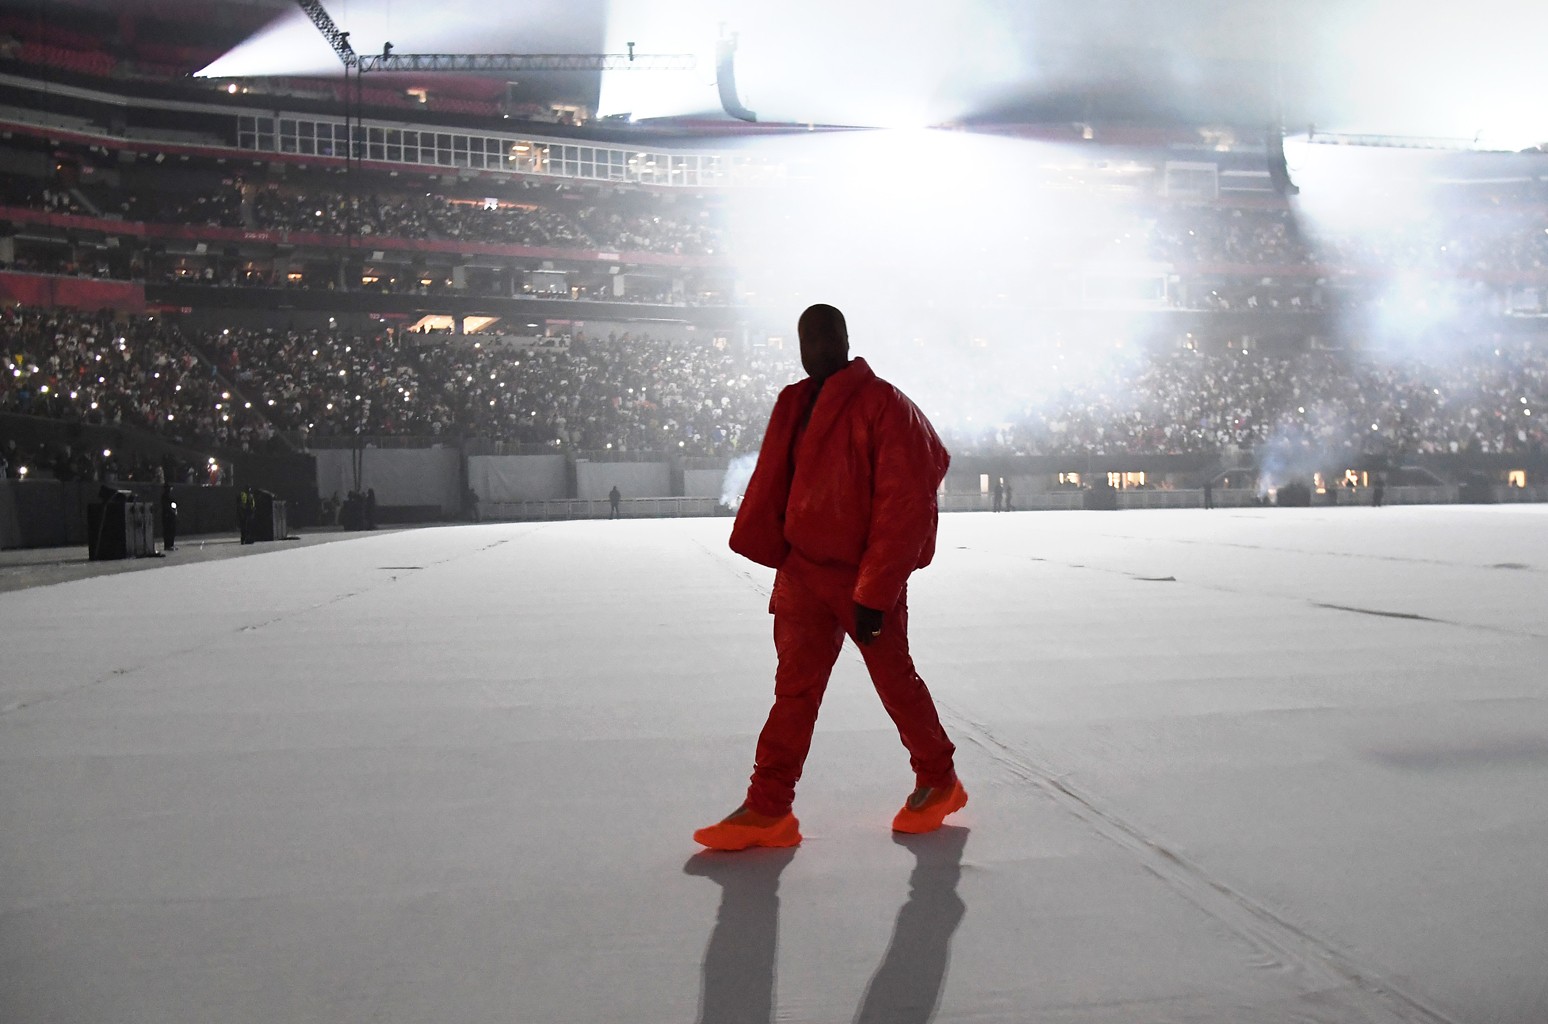 Donda: Meaning And Inspiration Behind Kanye West Album's Name - ABTC